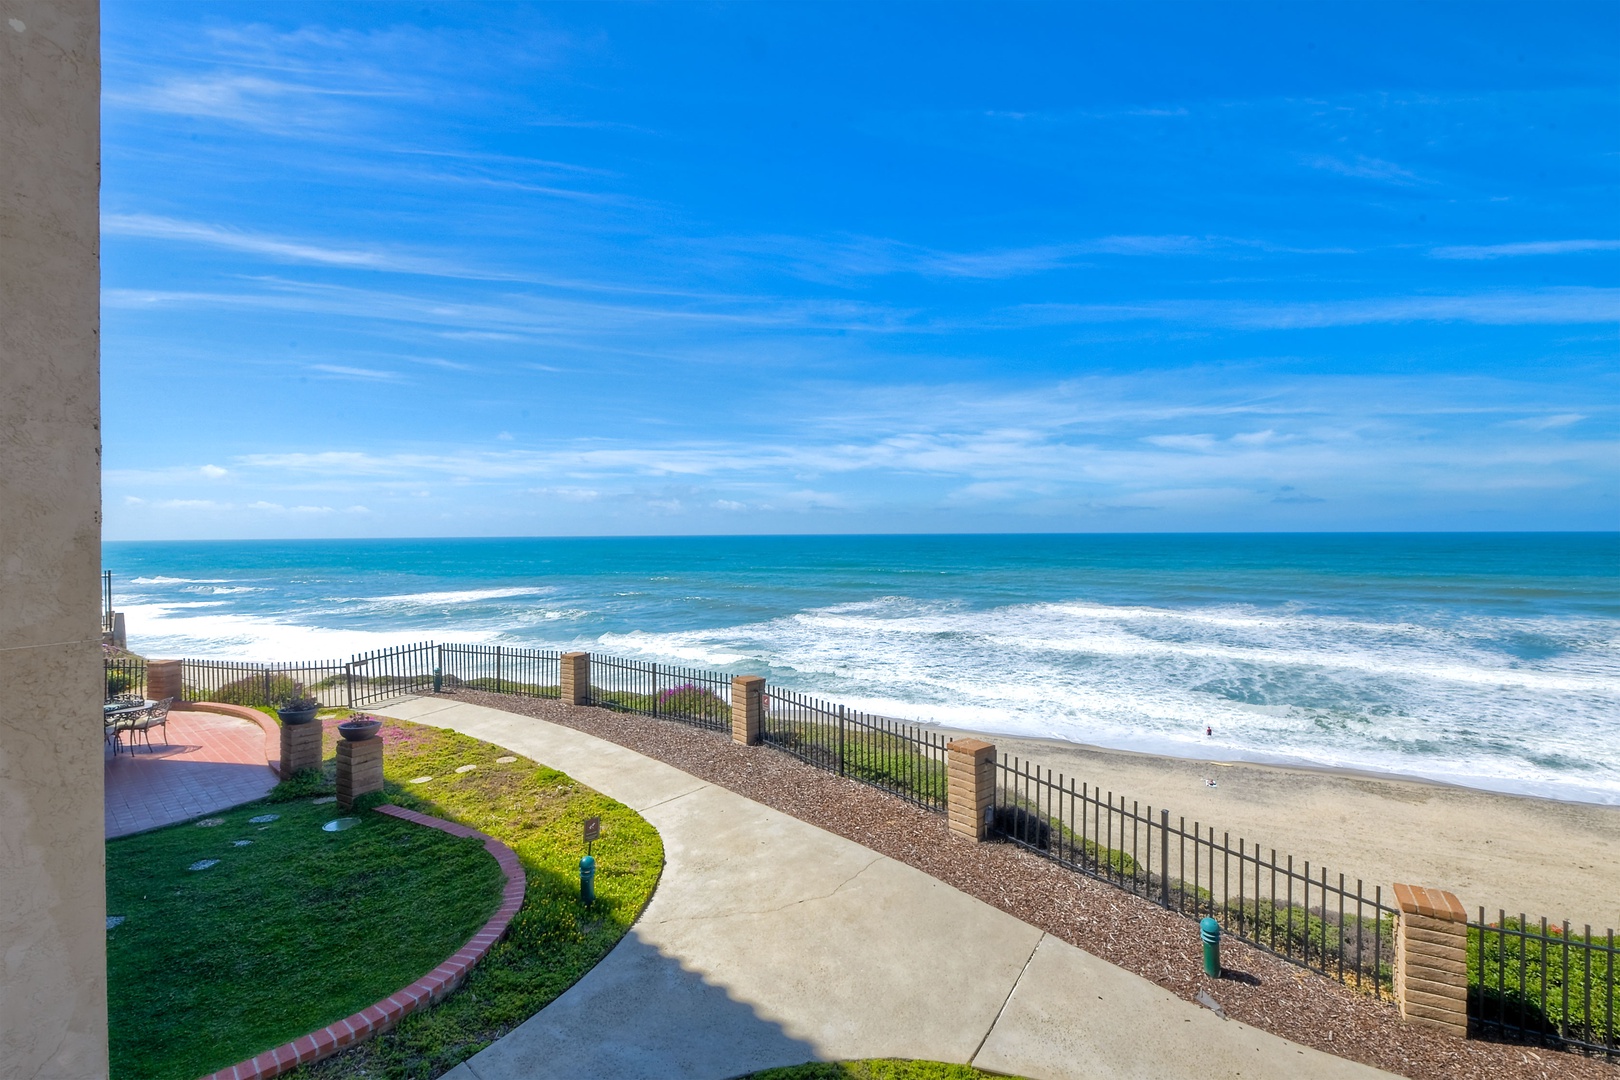 Soak in the breathaking ocean views from your private balcony